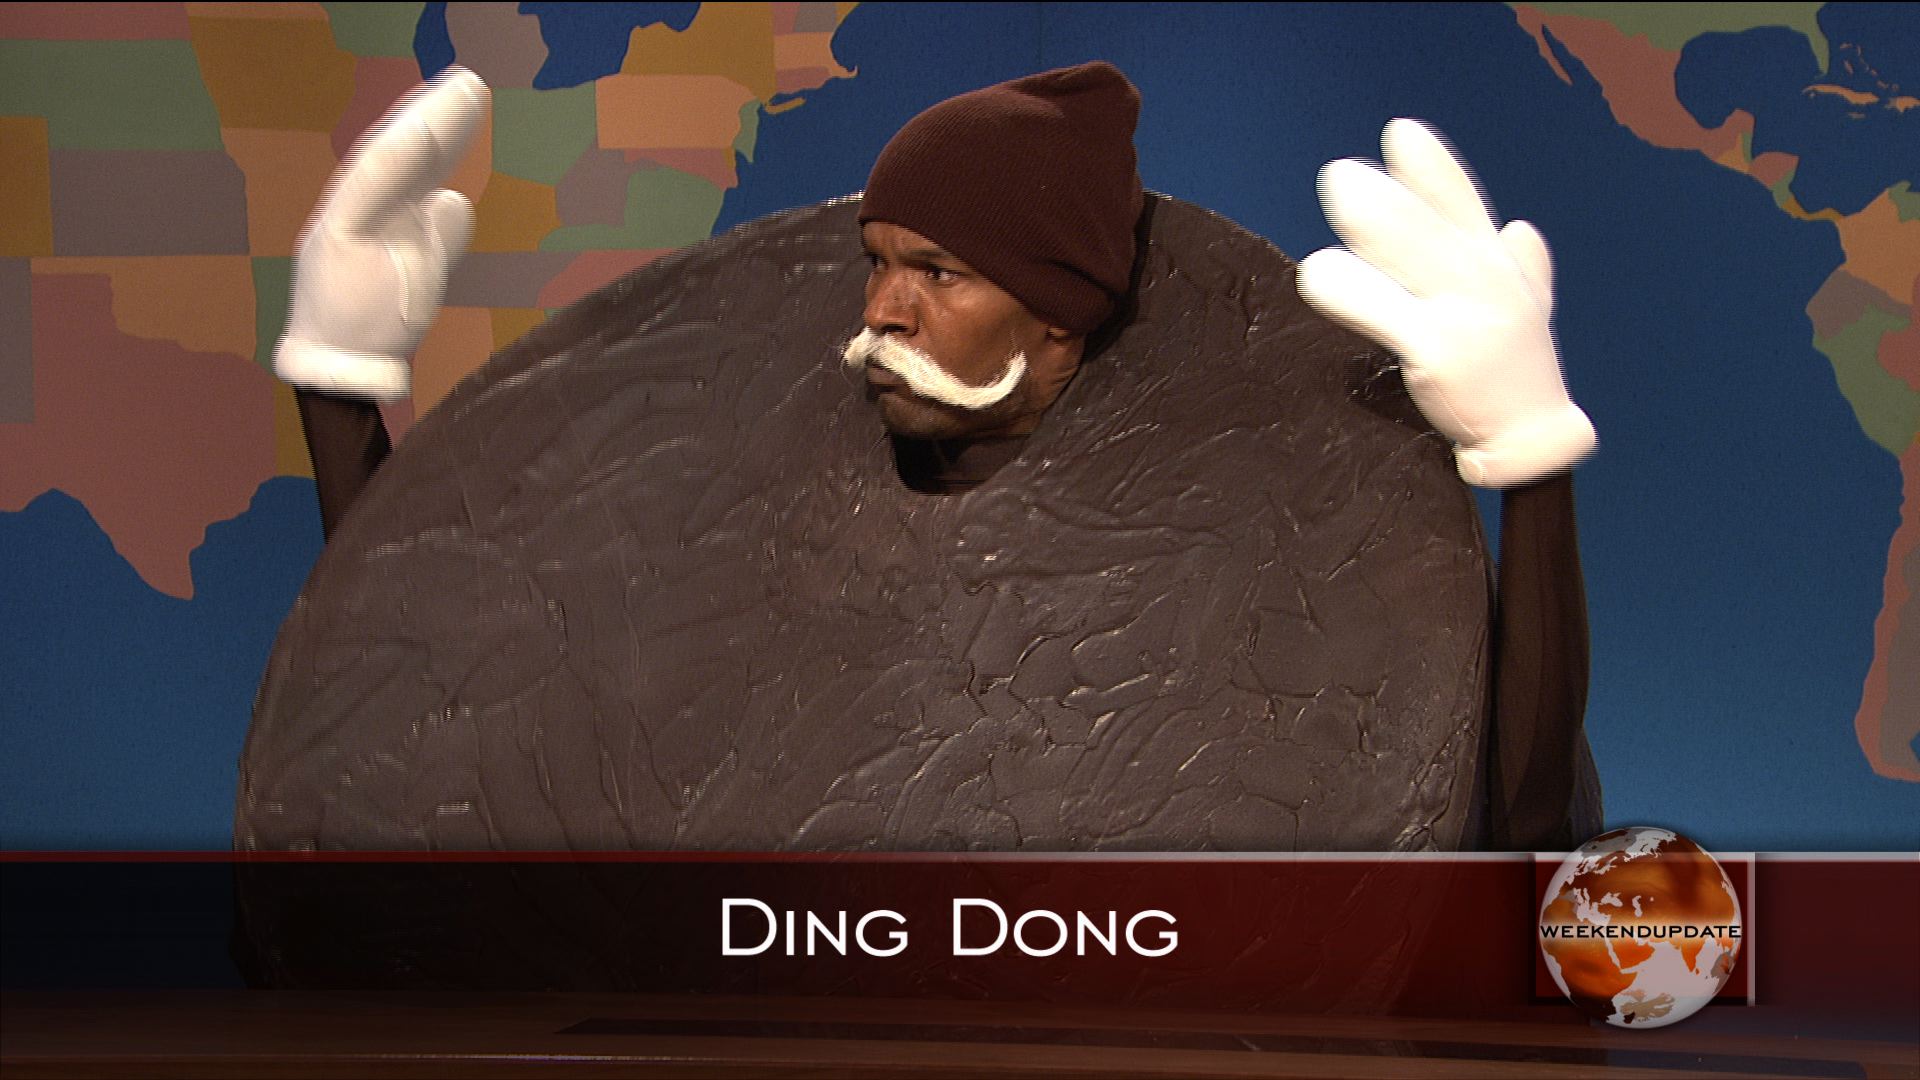 Watch Saturday Night Live Highlight Weekend Update Ding Dong Nbc Com